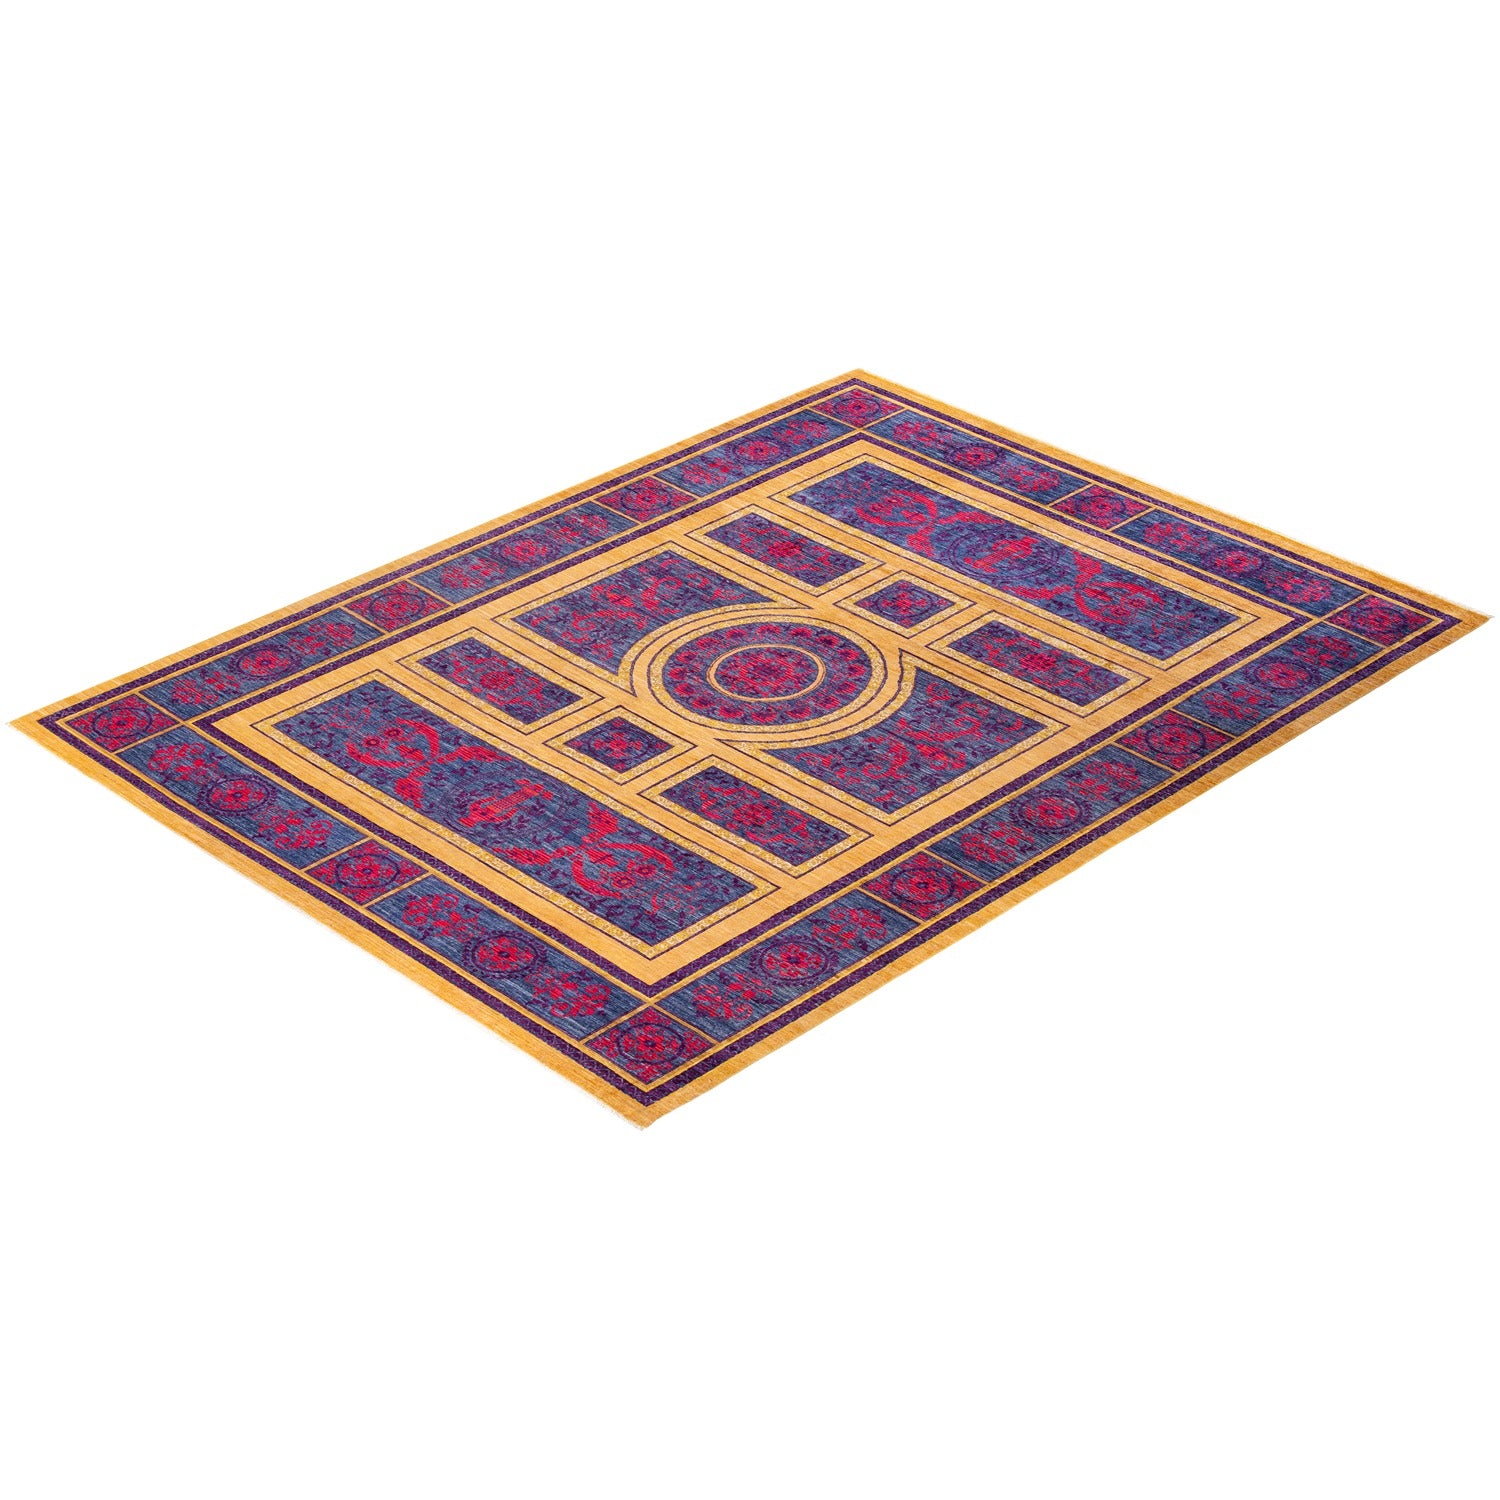 Vibrant rectangular area rug with geometric and floral design.